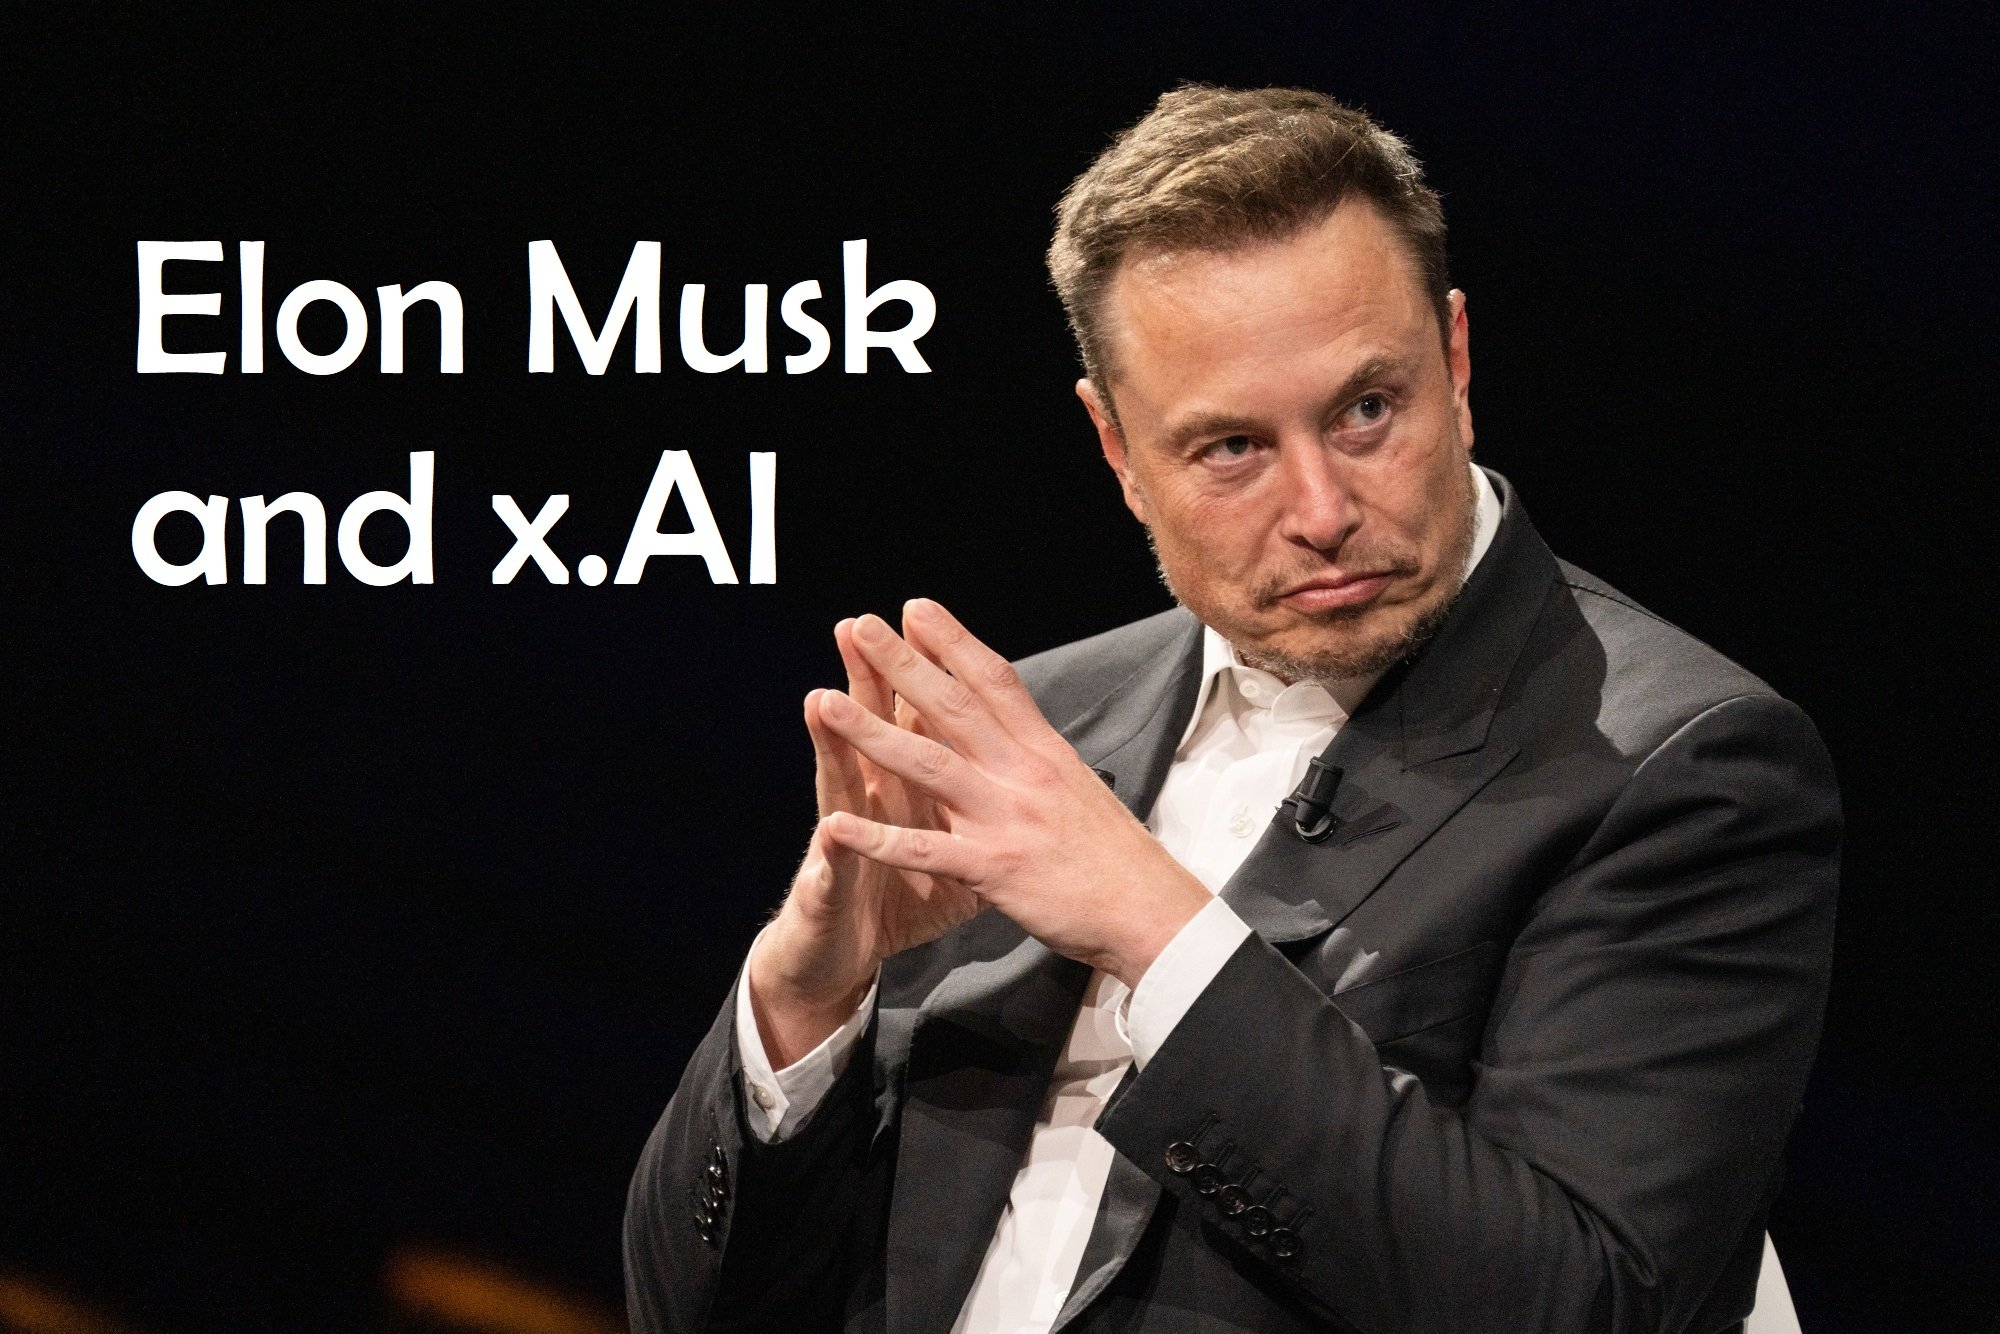 Elon Musk's creation of a new artificial intelligence company called xAI